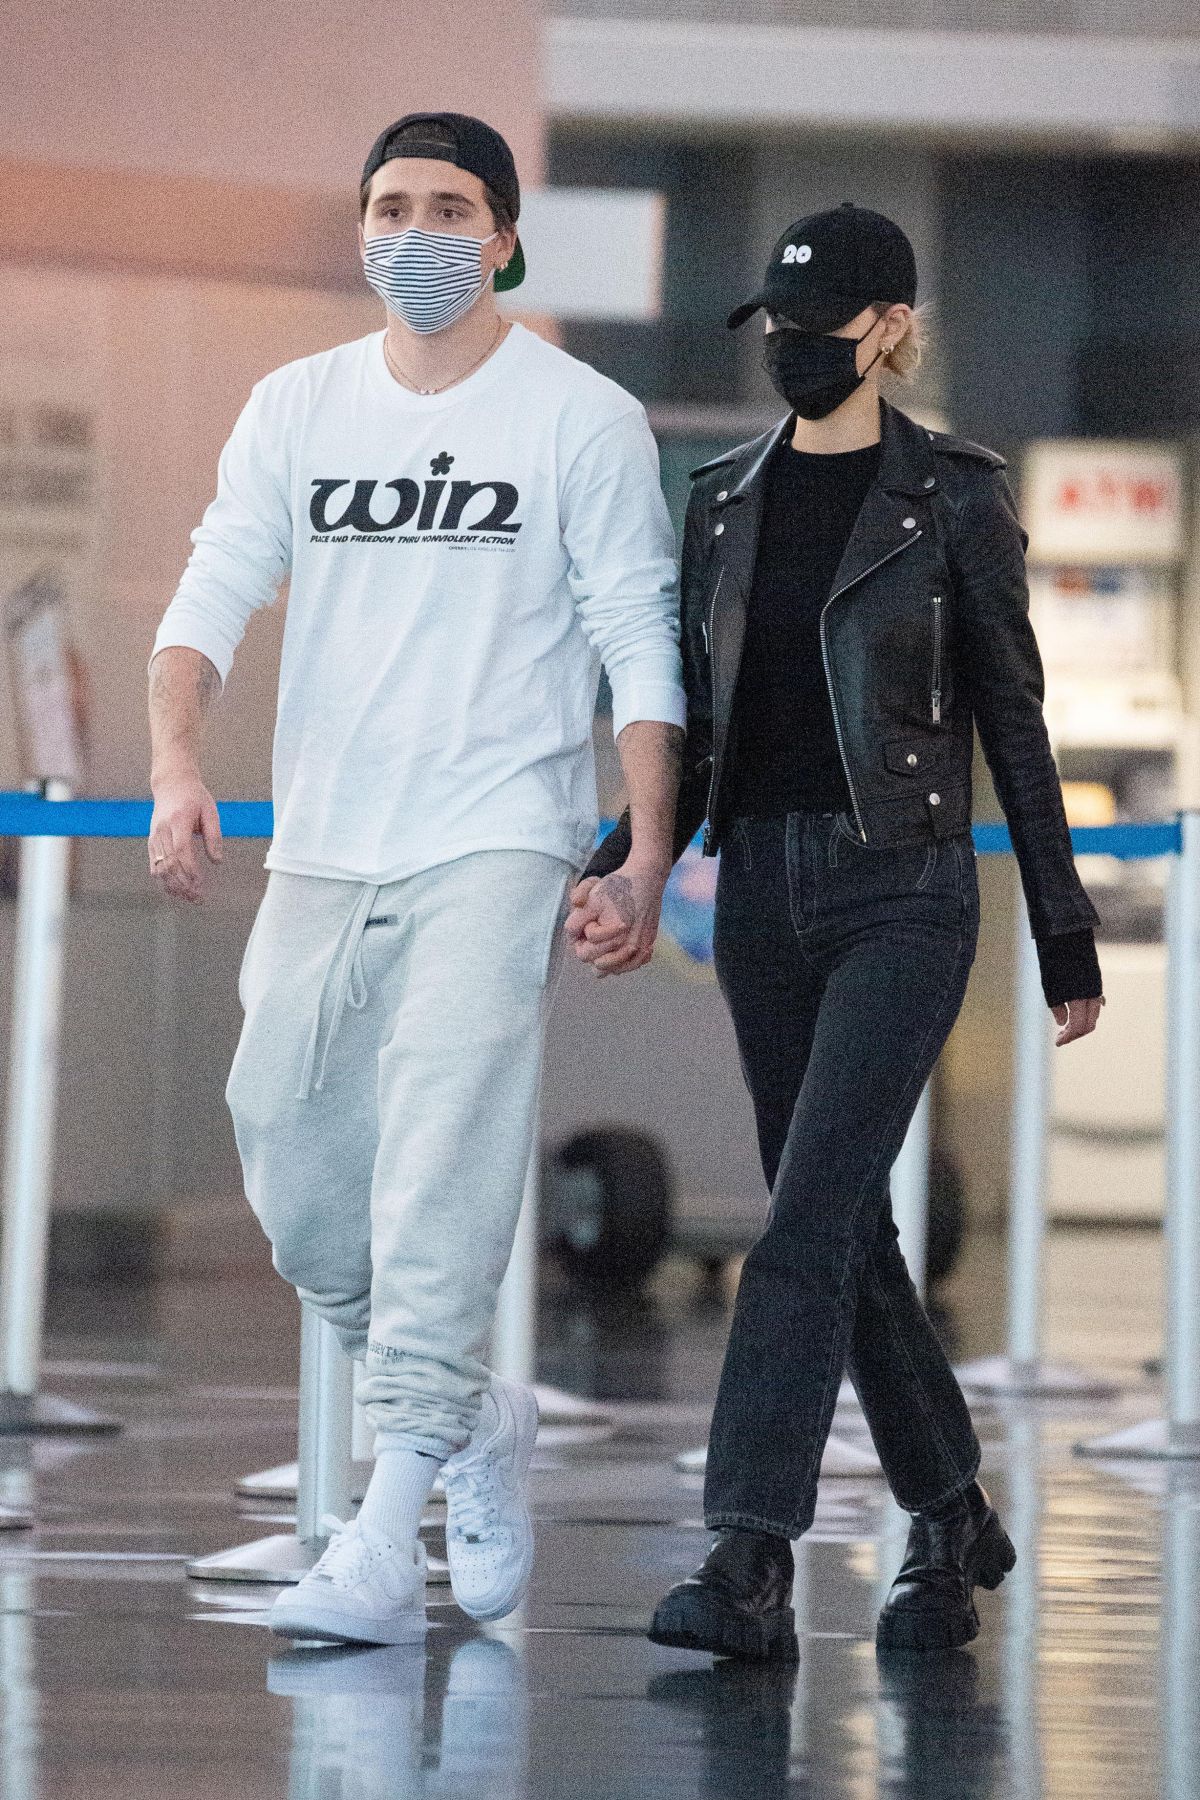 Brooklyn Beckham and Nicola Peltz don face masks and gloves as they arrive  at New York's JFK Airport